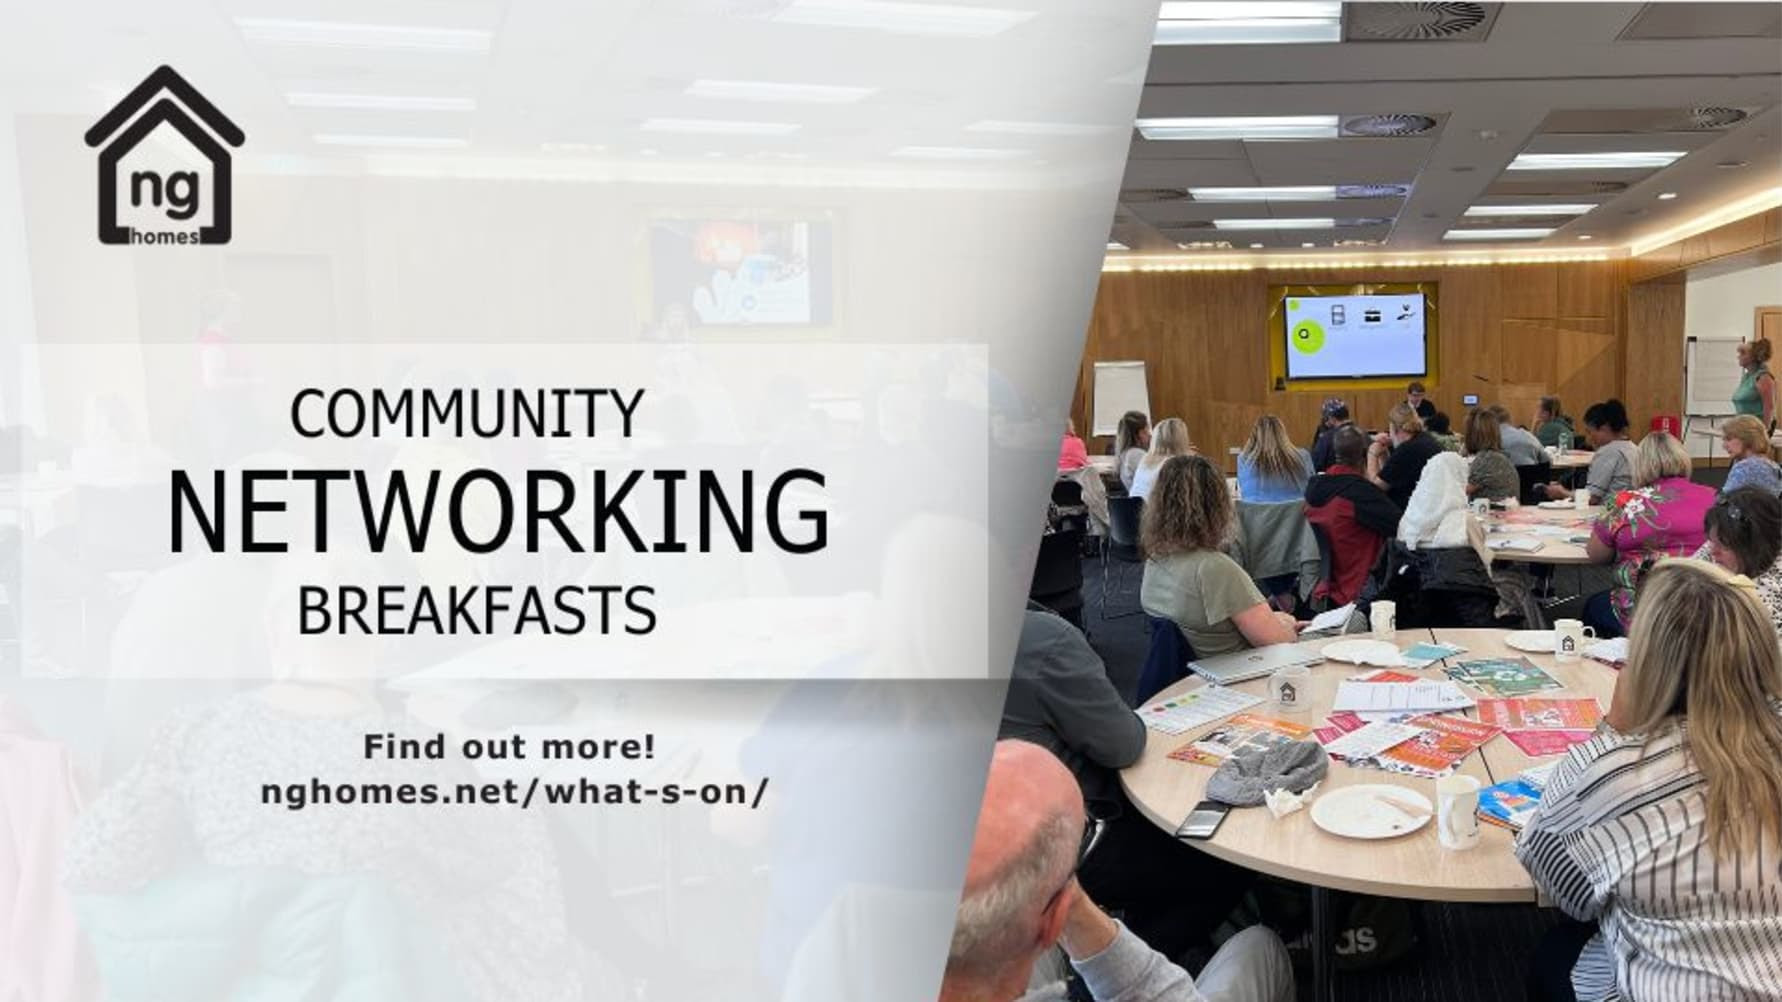 Connecting with support and resources at ng homes' Community Networking Breakfasts